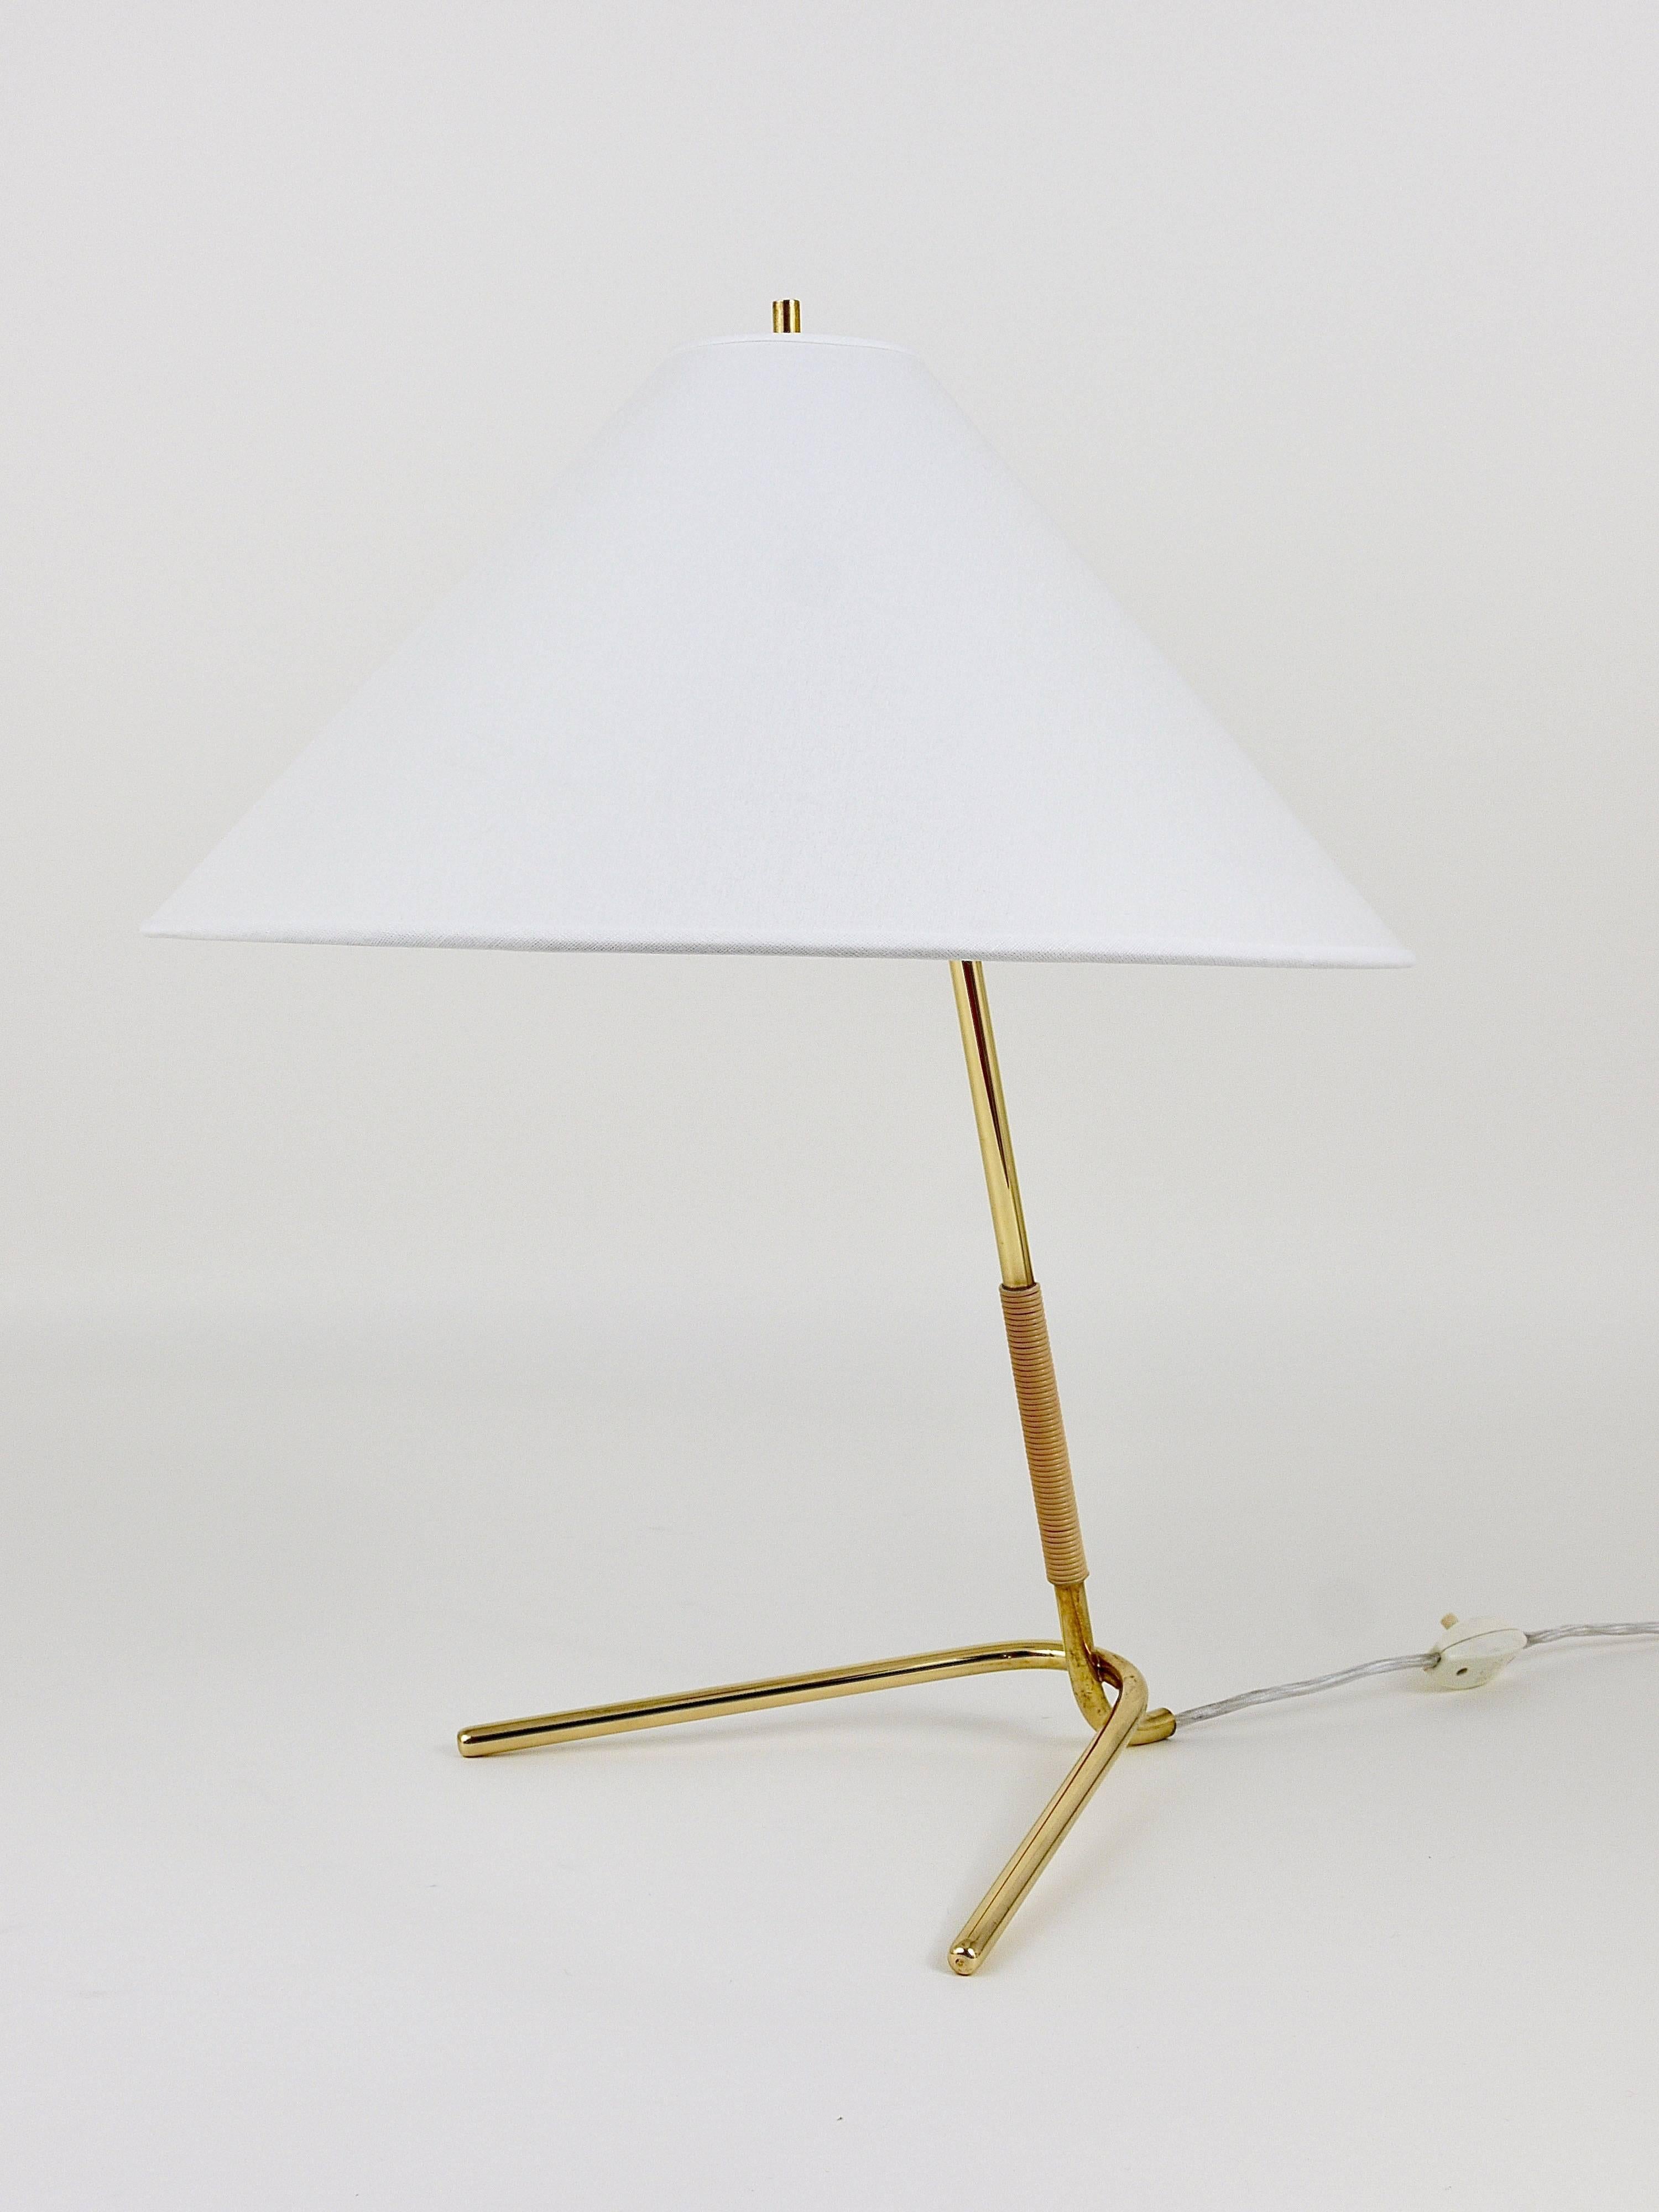 A beautiful modernist table or desk lamp from the 1950s, model 